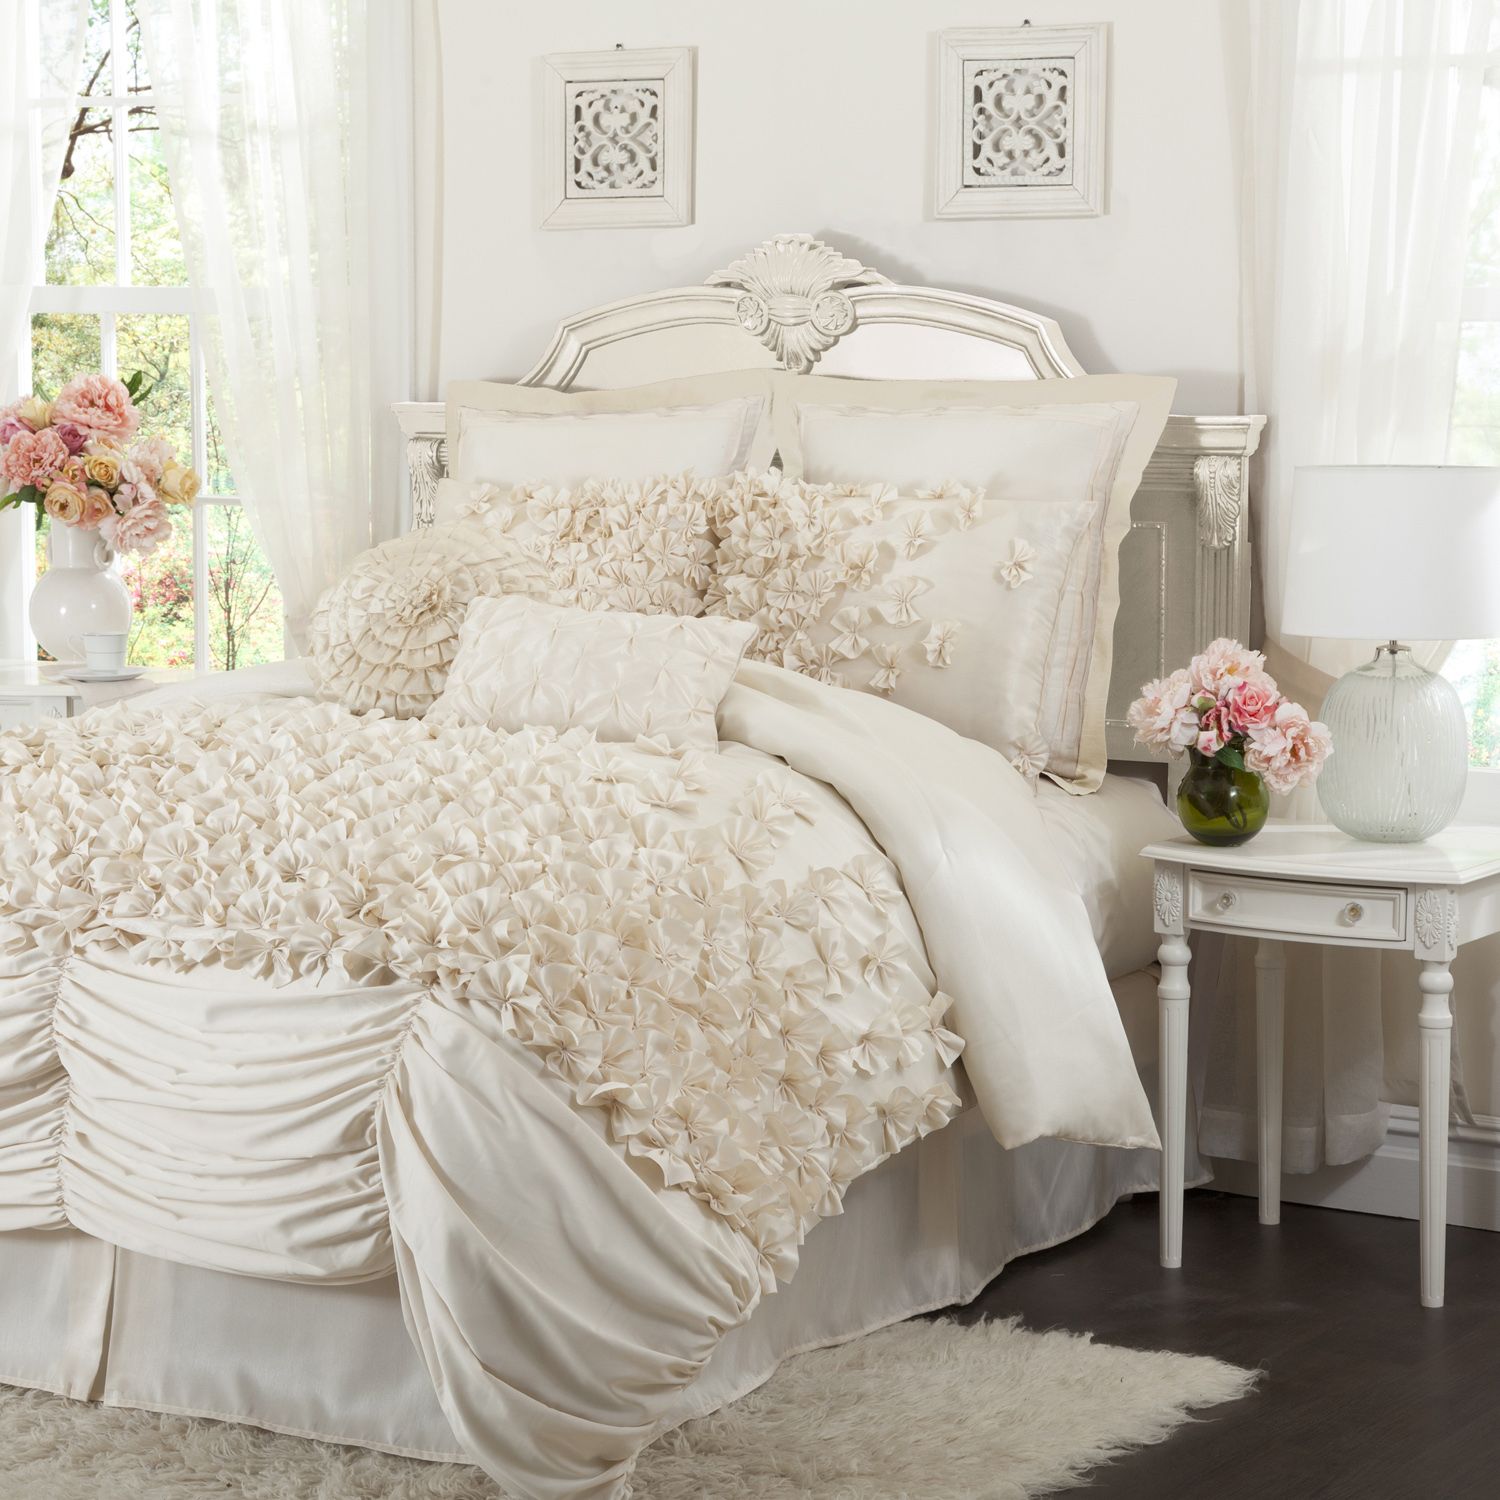 Lush Decor Lucia 4-pc Ivory Comforter Set Queen - Home - Bed & Bath